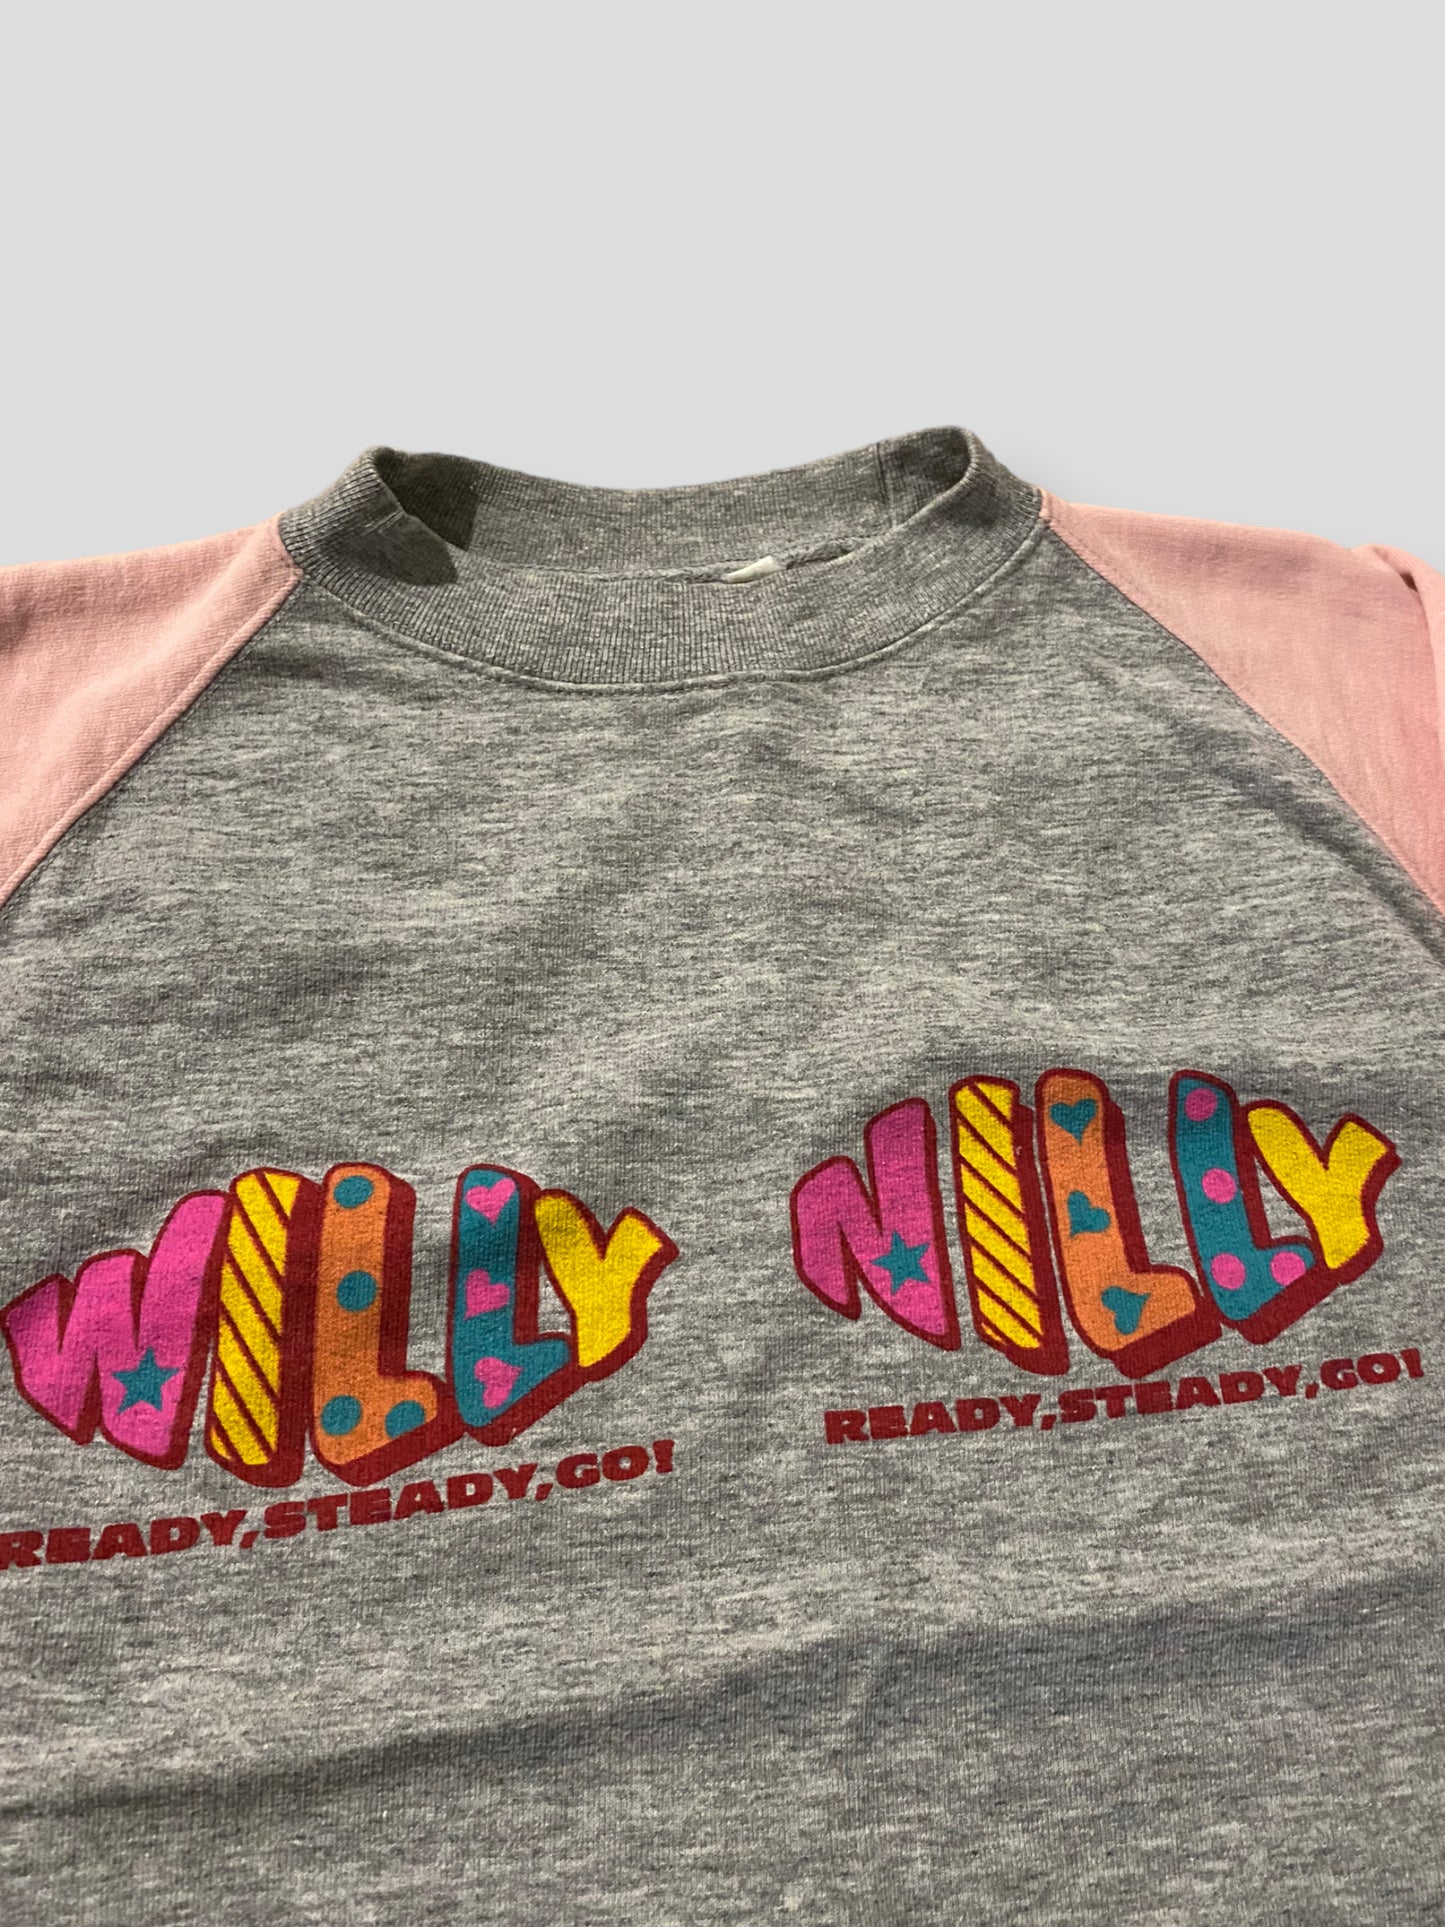 Willy Nilly Vintage College (XL)